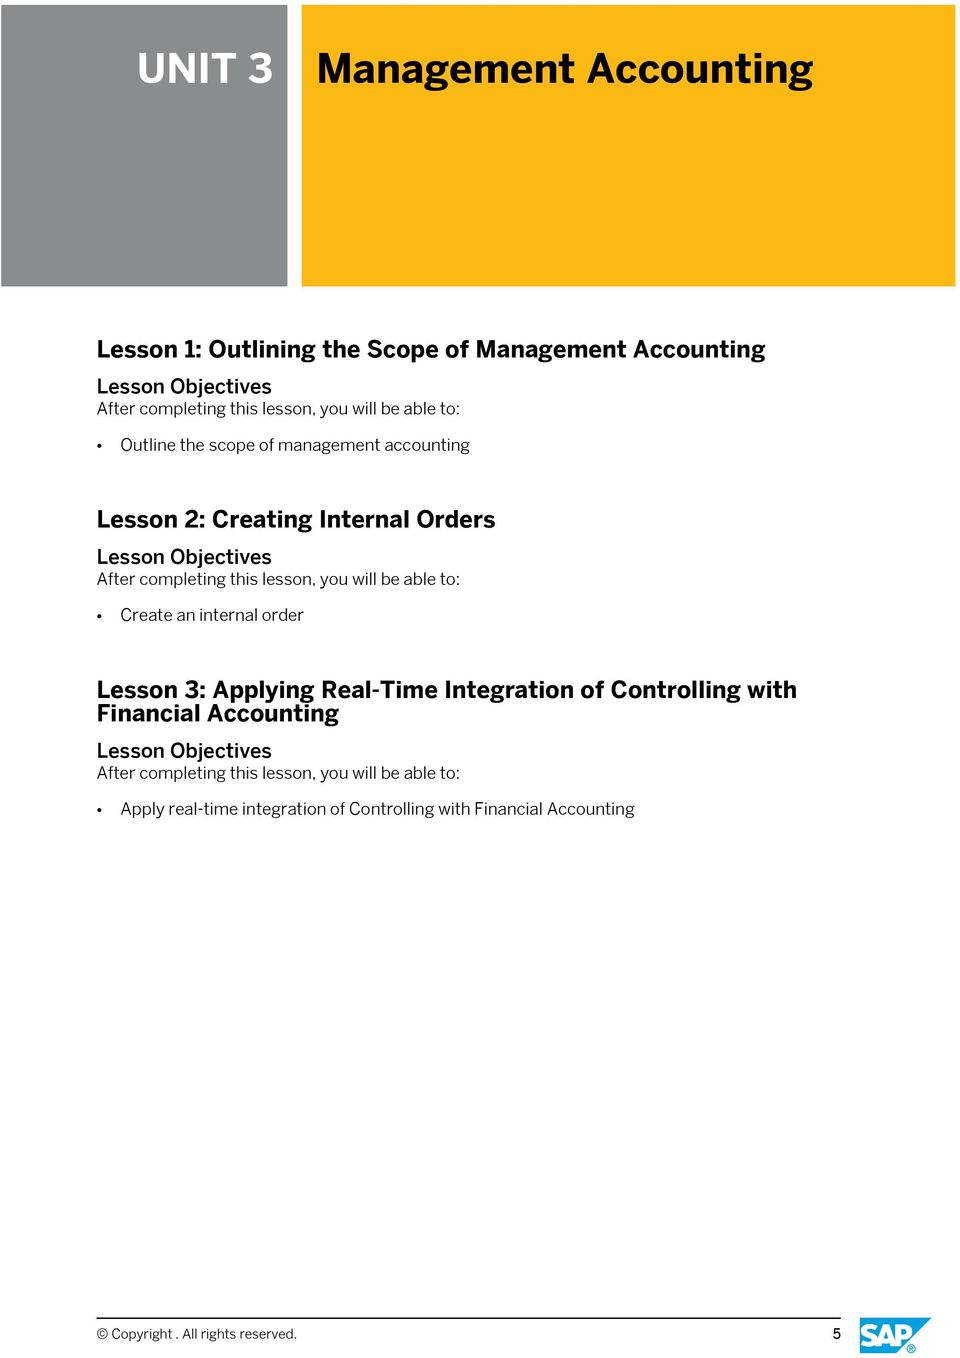 order Lesson 3: Applying Real-Time Integration of Controlling with Financial Accounting